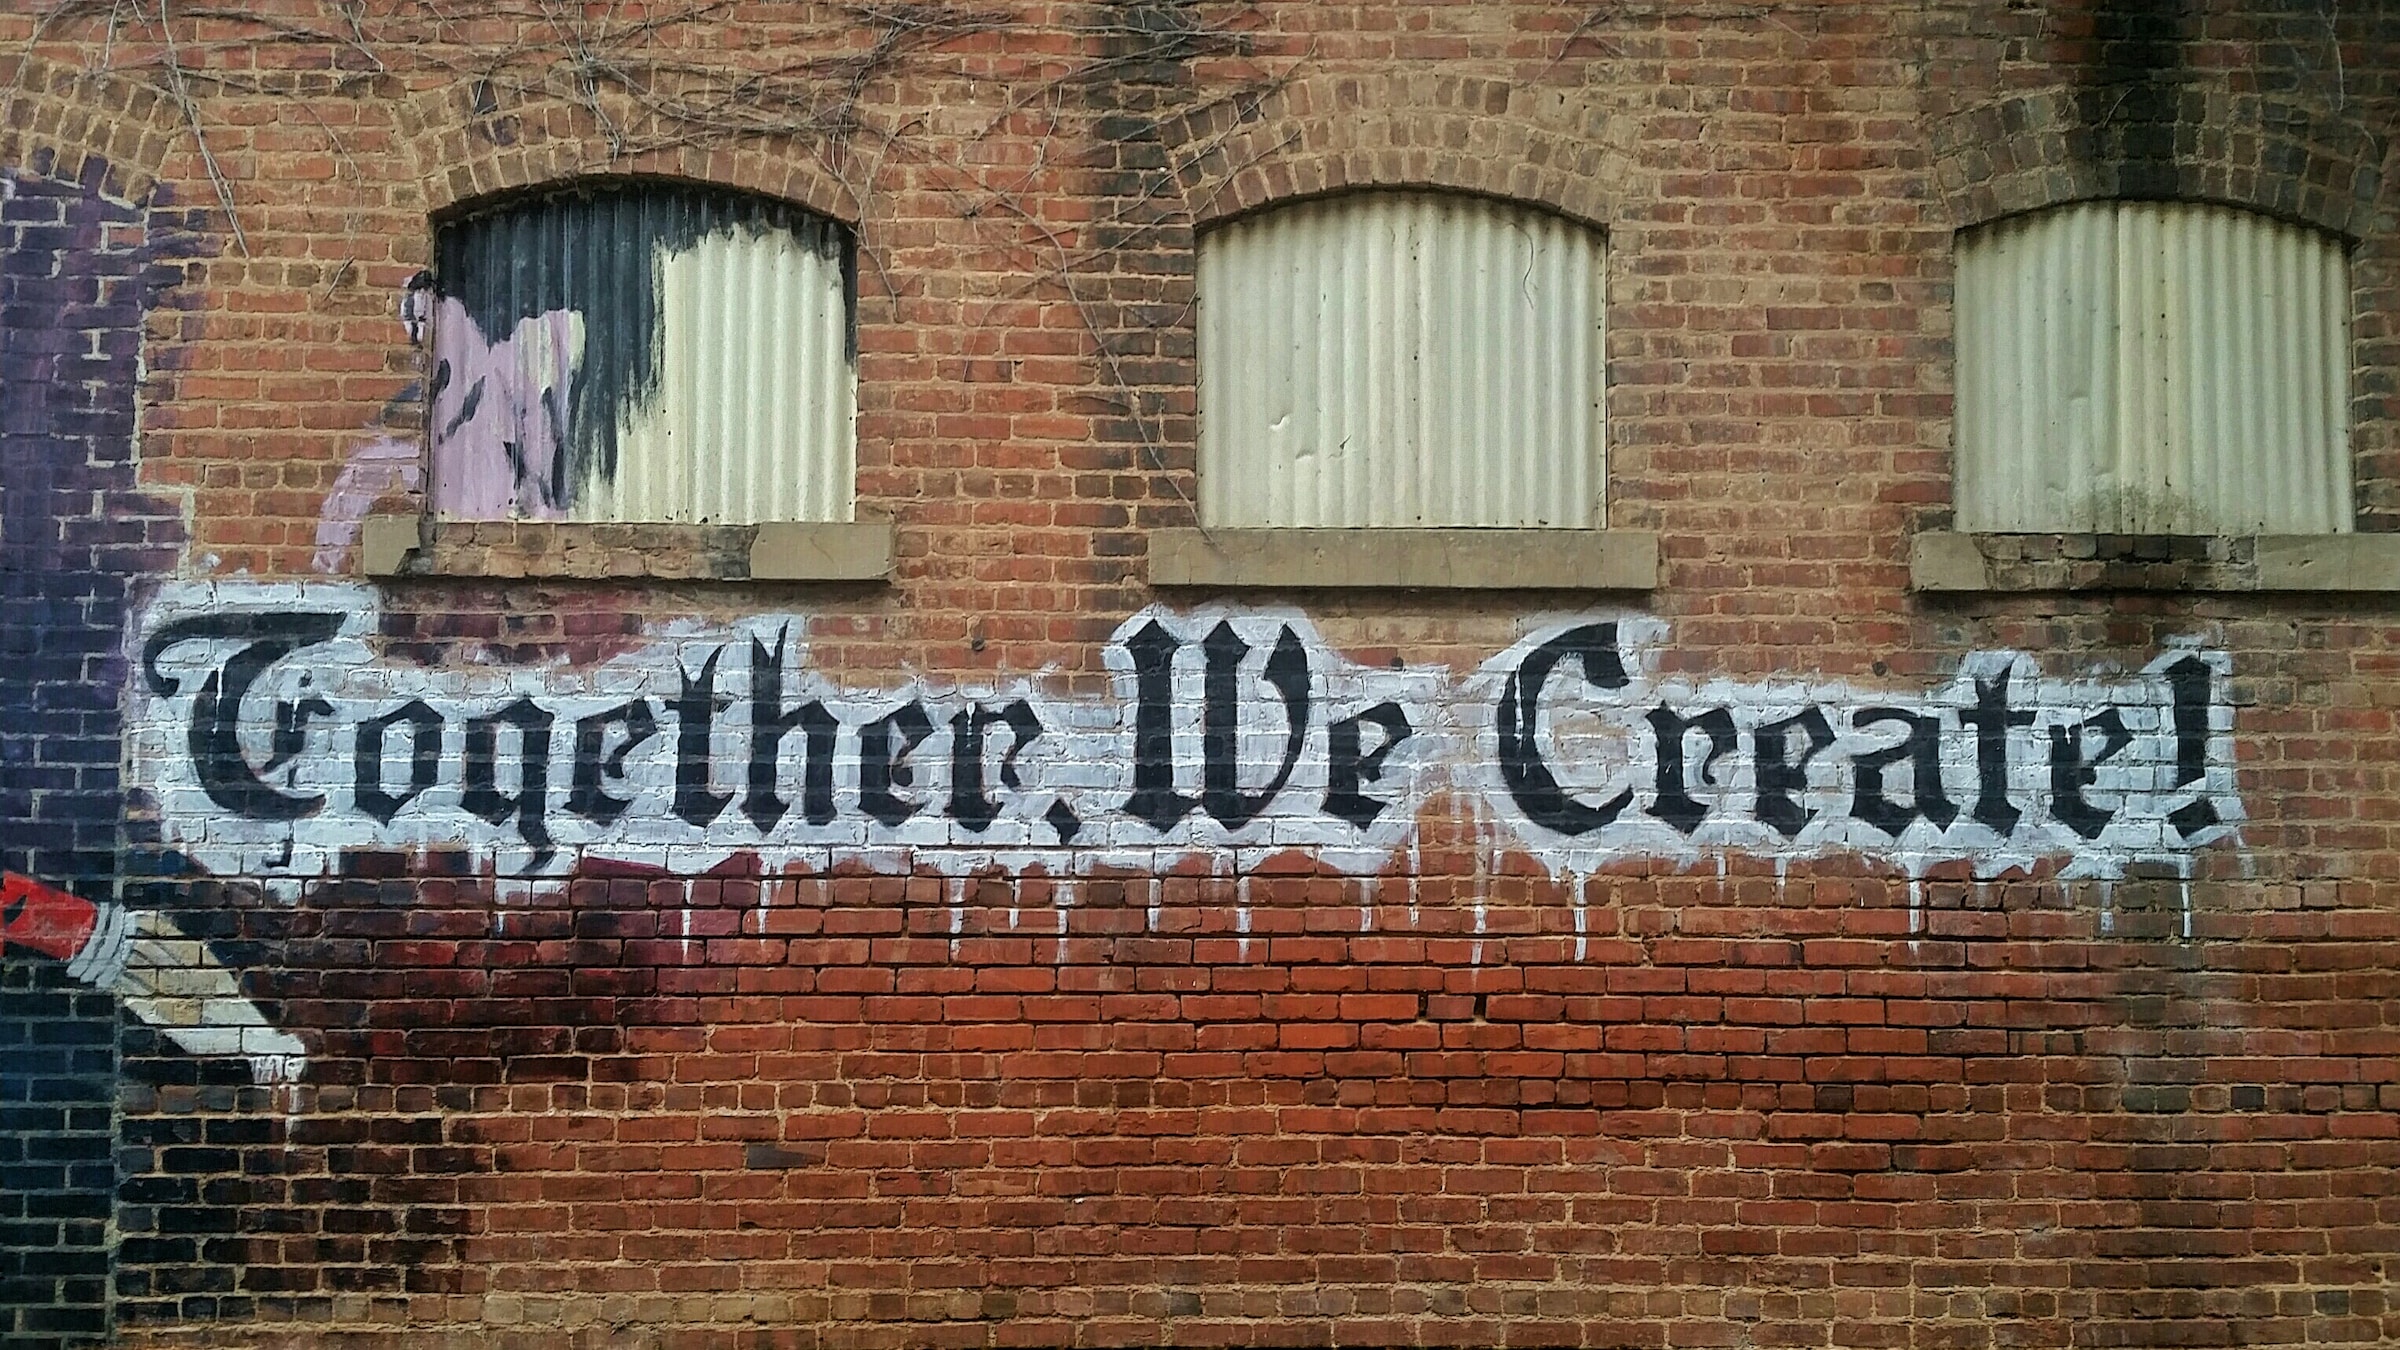 The words 'Together we create' in graffiti on a brick wall